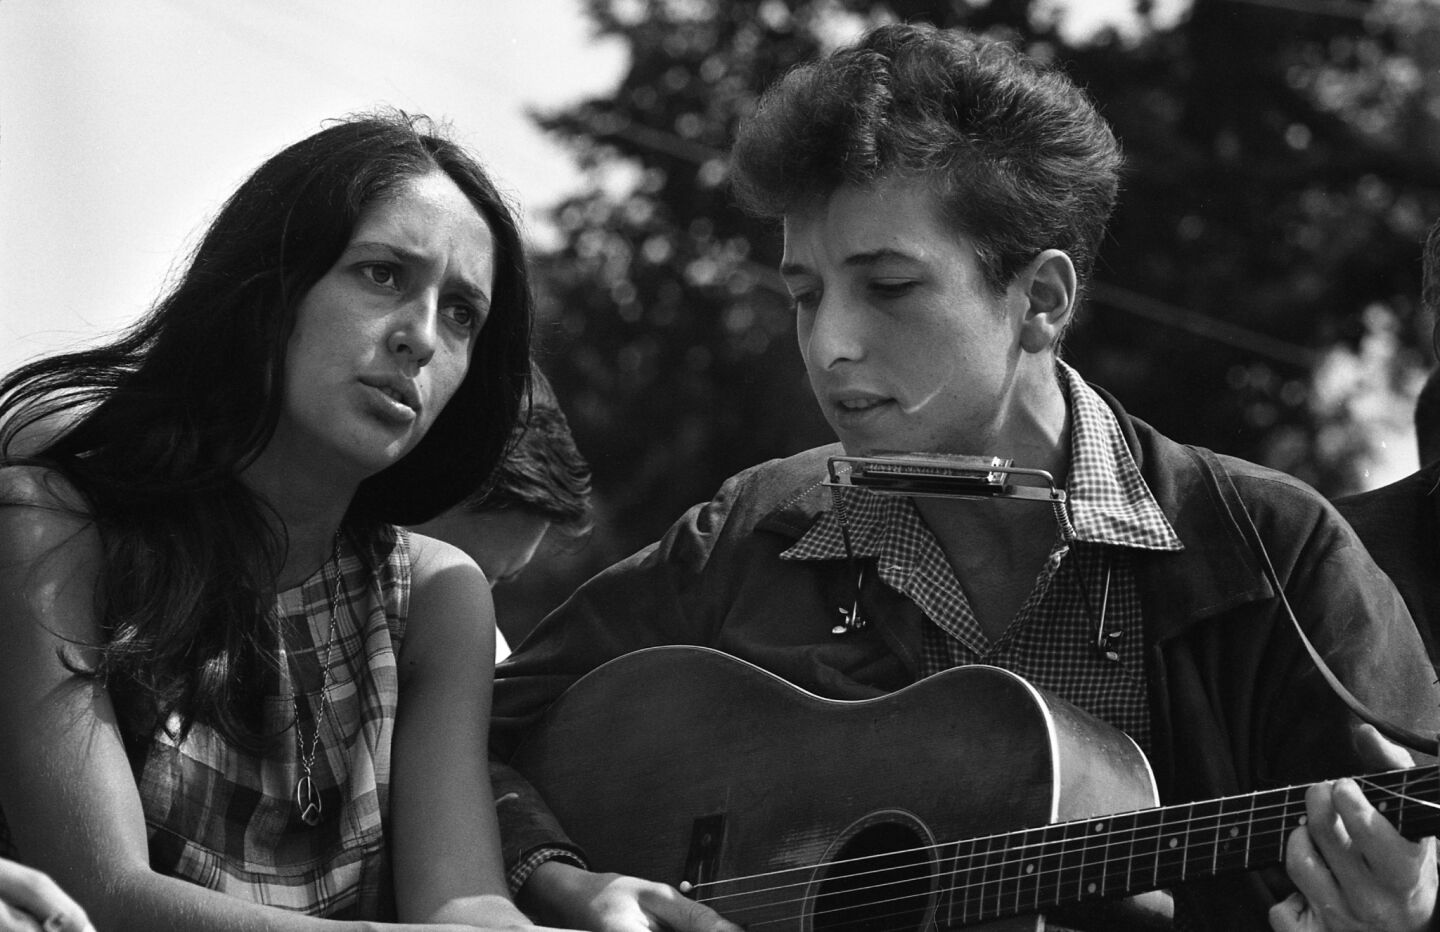 Political folk singer Joan Baez was a highly influential collaborator with Dylan in his early career. They're pictured performing during the March on Washington civil rights rally on Aug. 28, 1963.